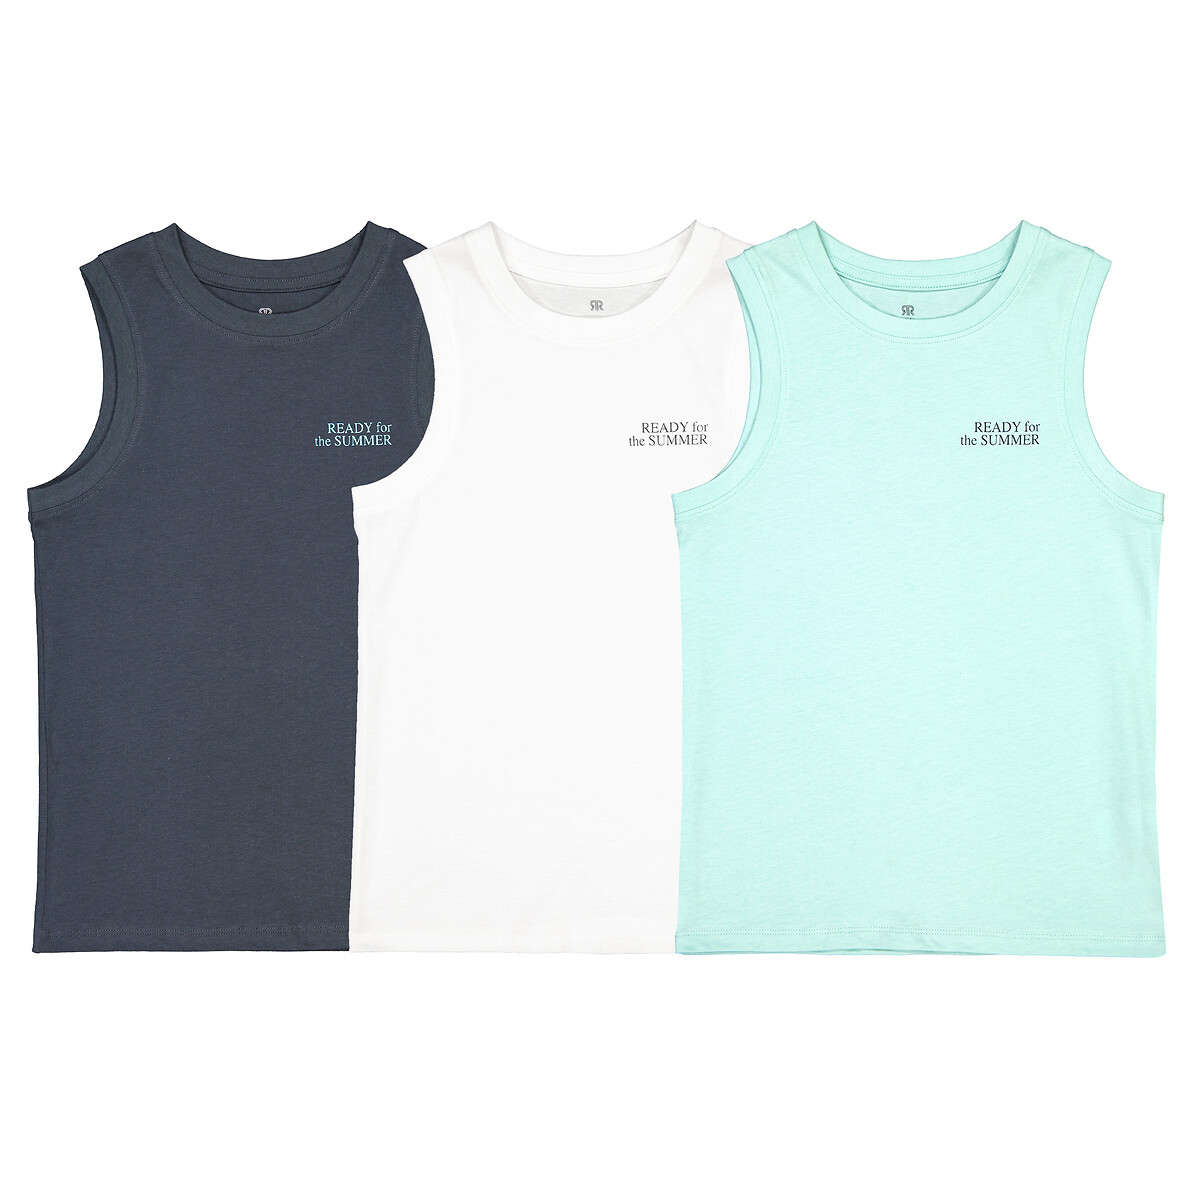 Pack of 3 Vest Tops with Slogan Print in Cotton